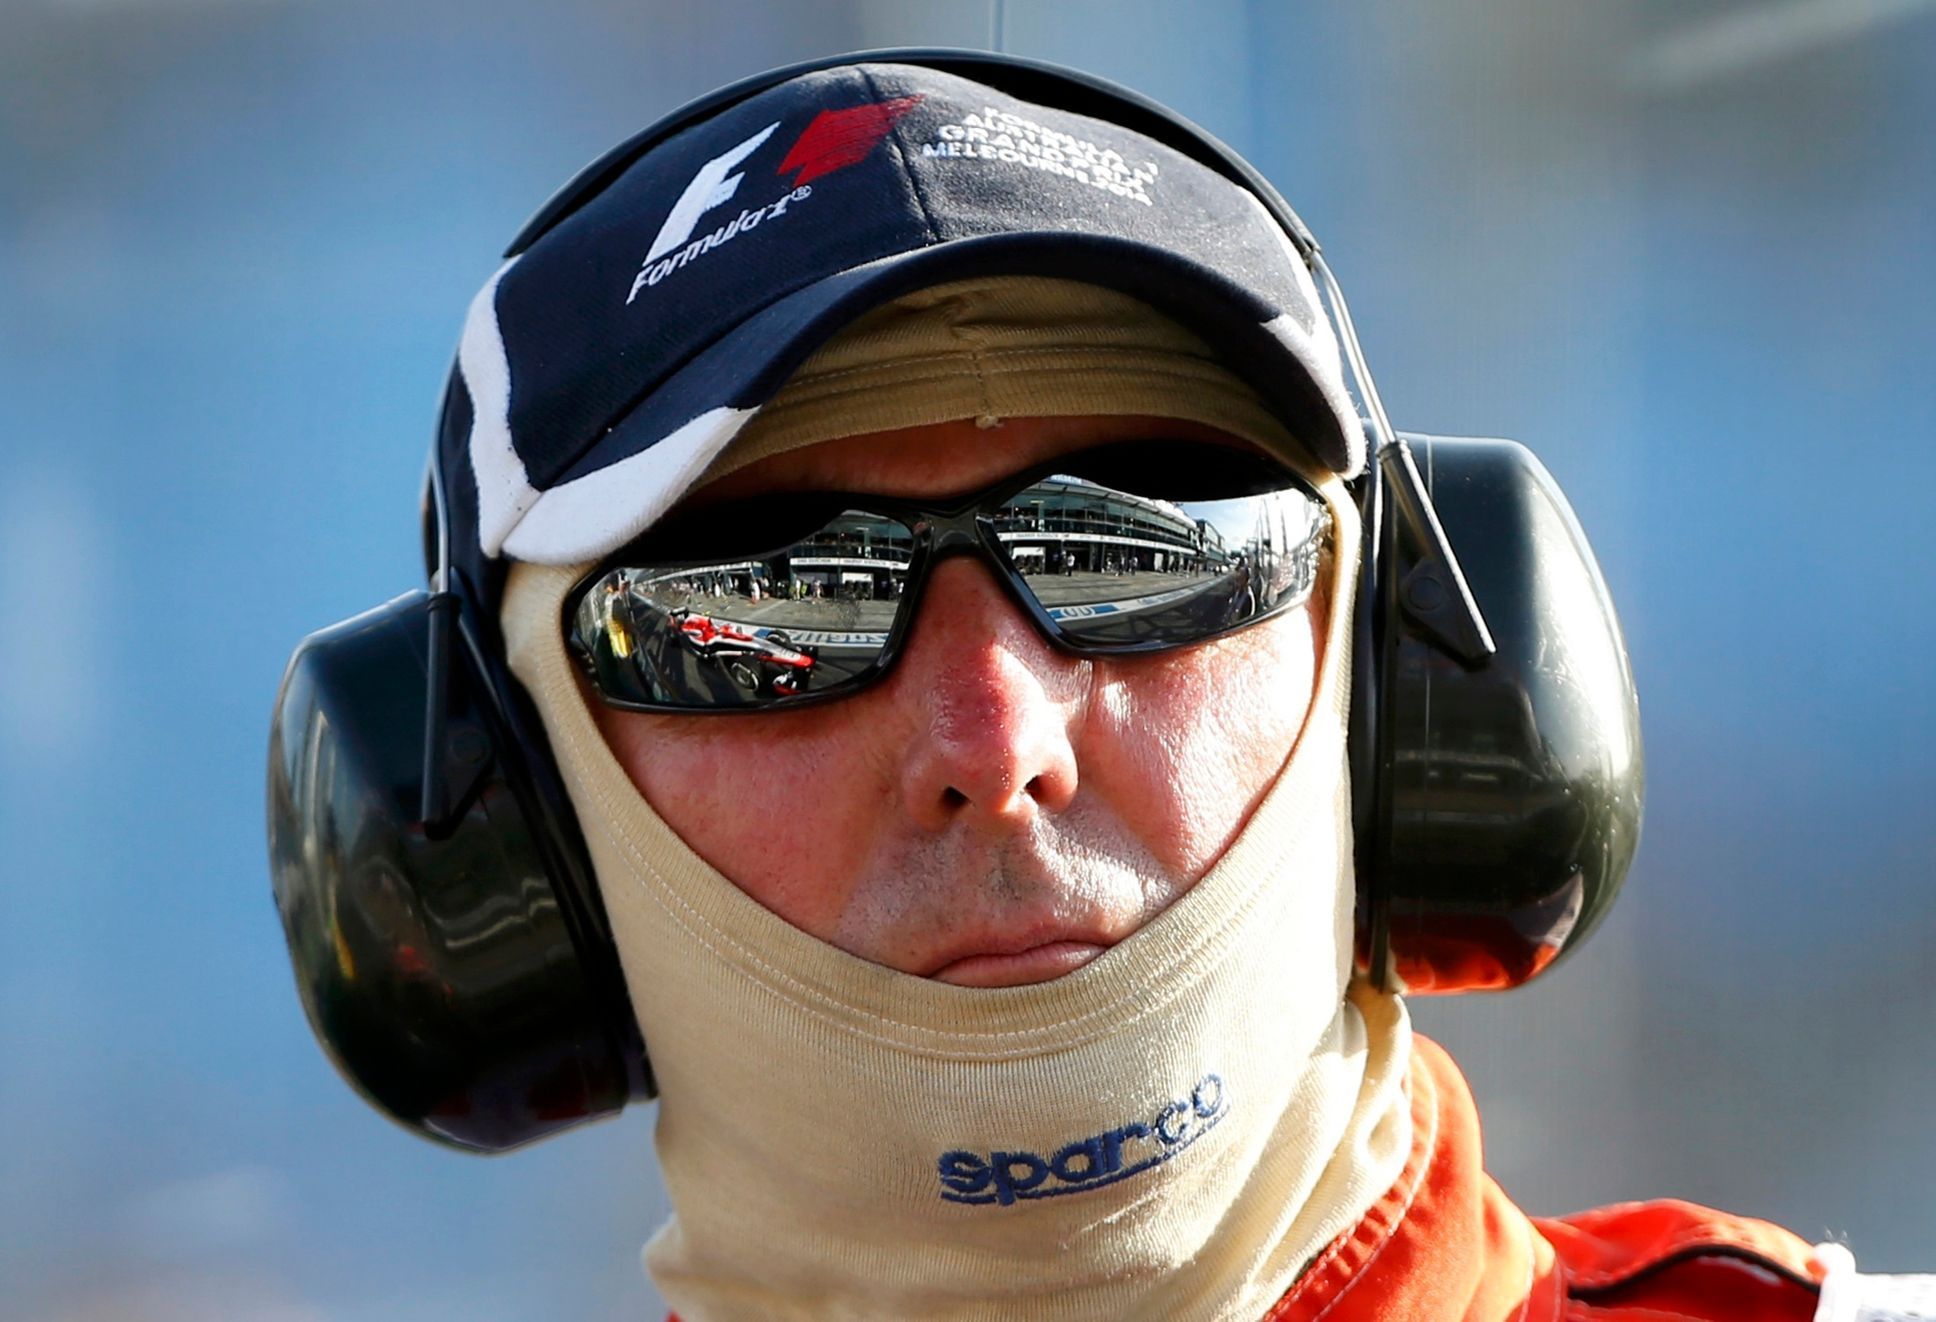 Marussia Formula One driver Chilton of Britain is reflected in the sunglasses of a race official during the second practice session of the Australian F1 Grand Prix in Melbourne